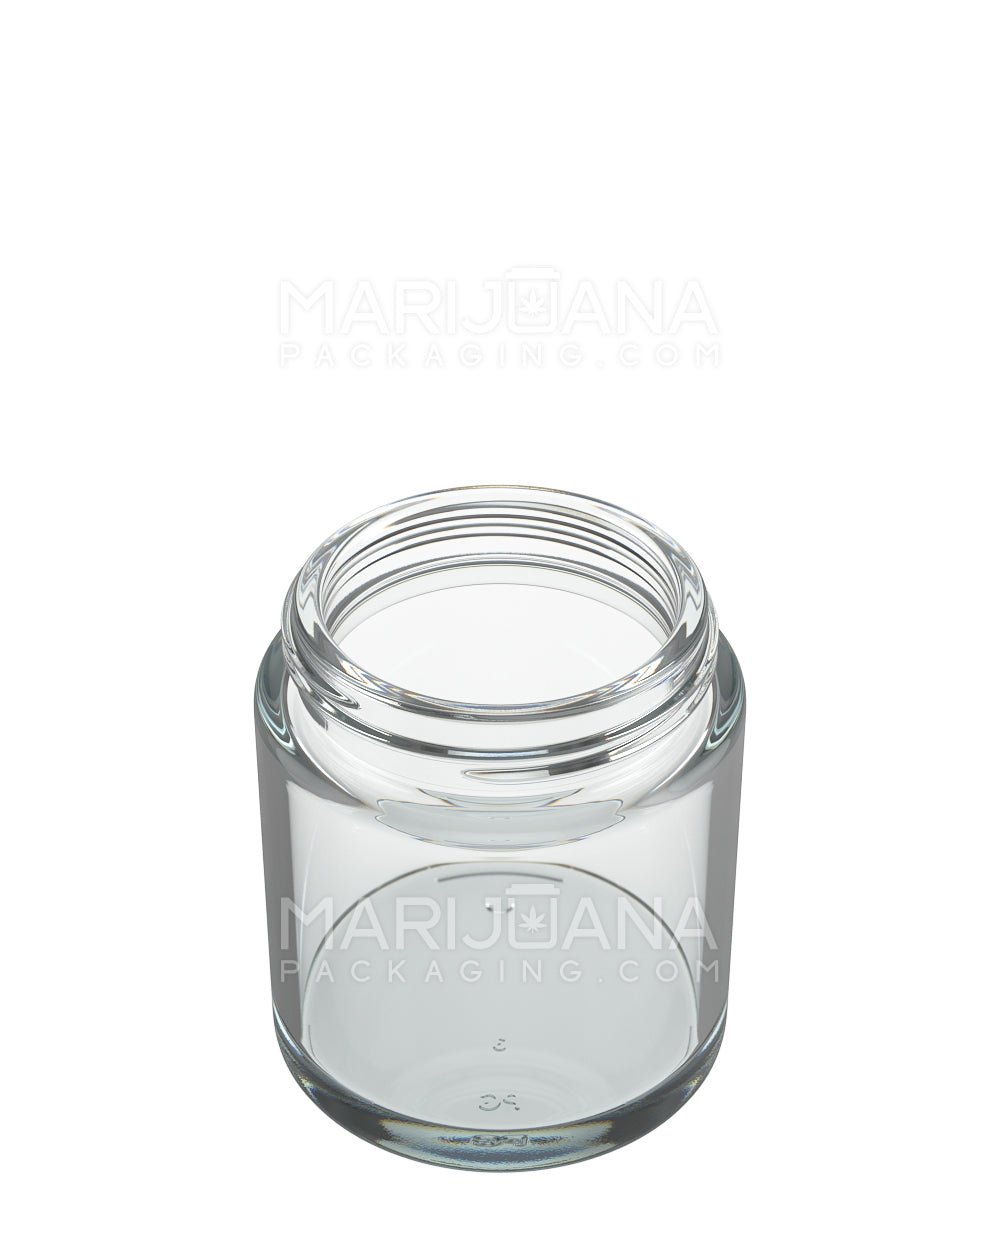 Wholesale 6 Oz Glass Jars for Trendy and Sustainable Packaging 